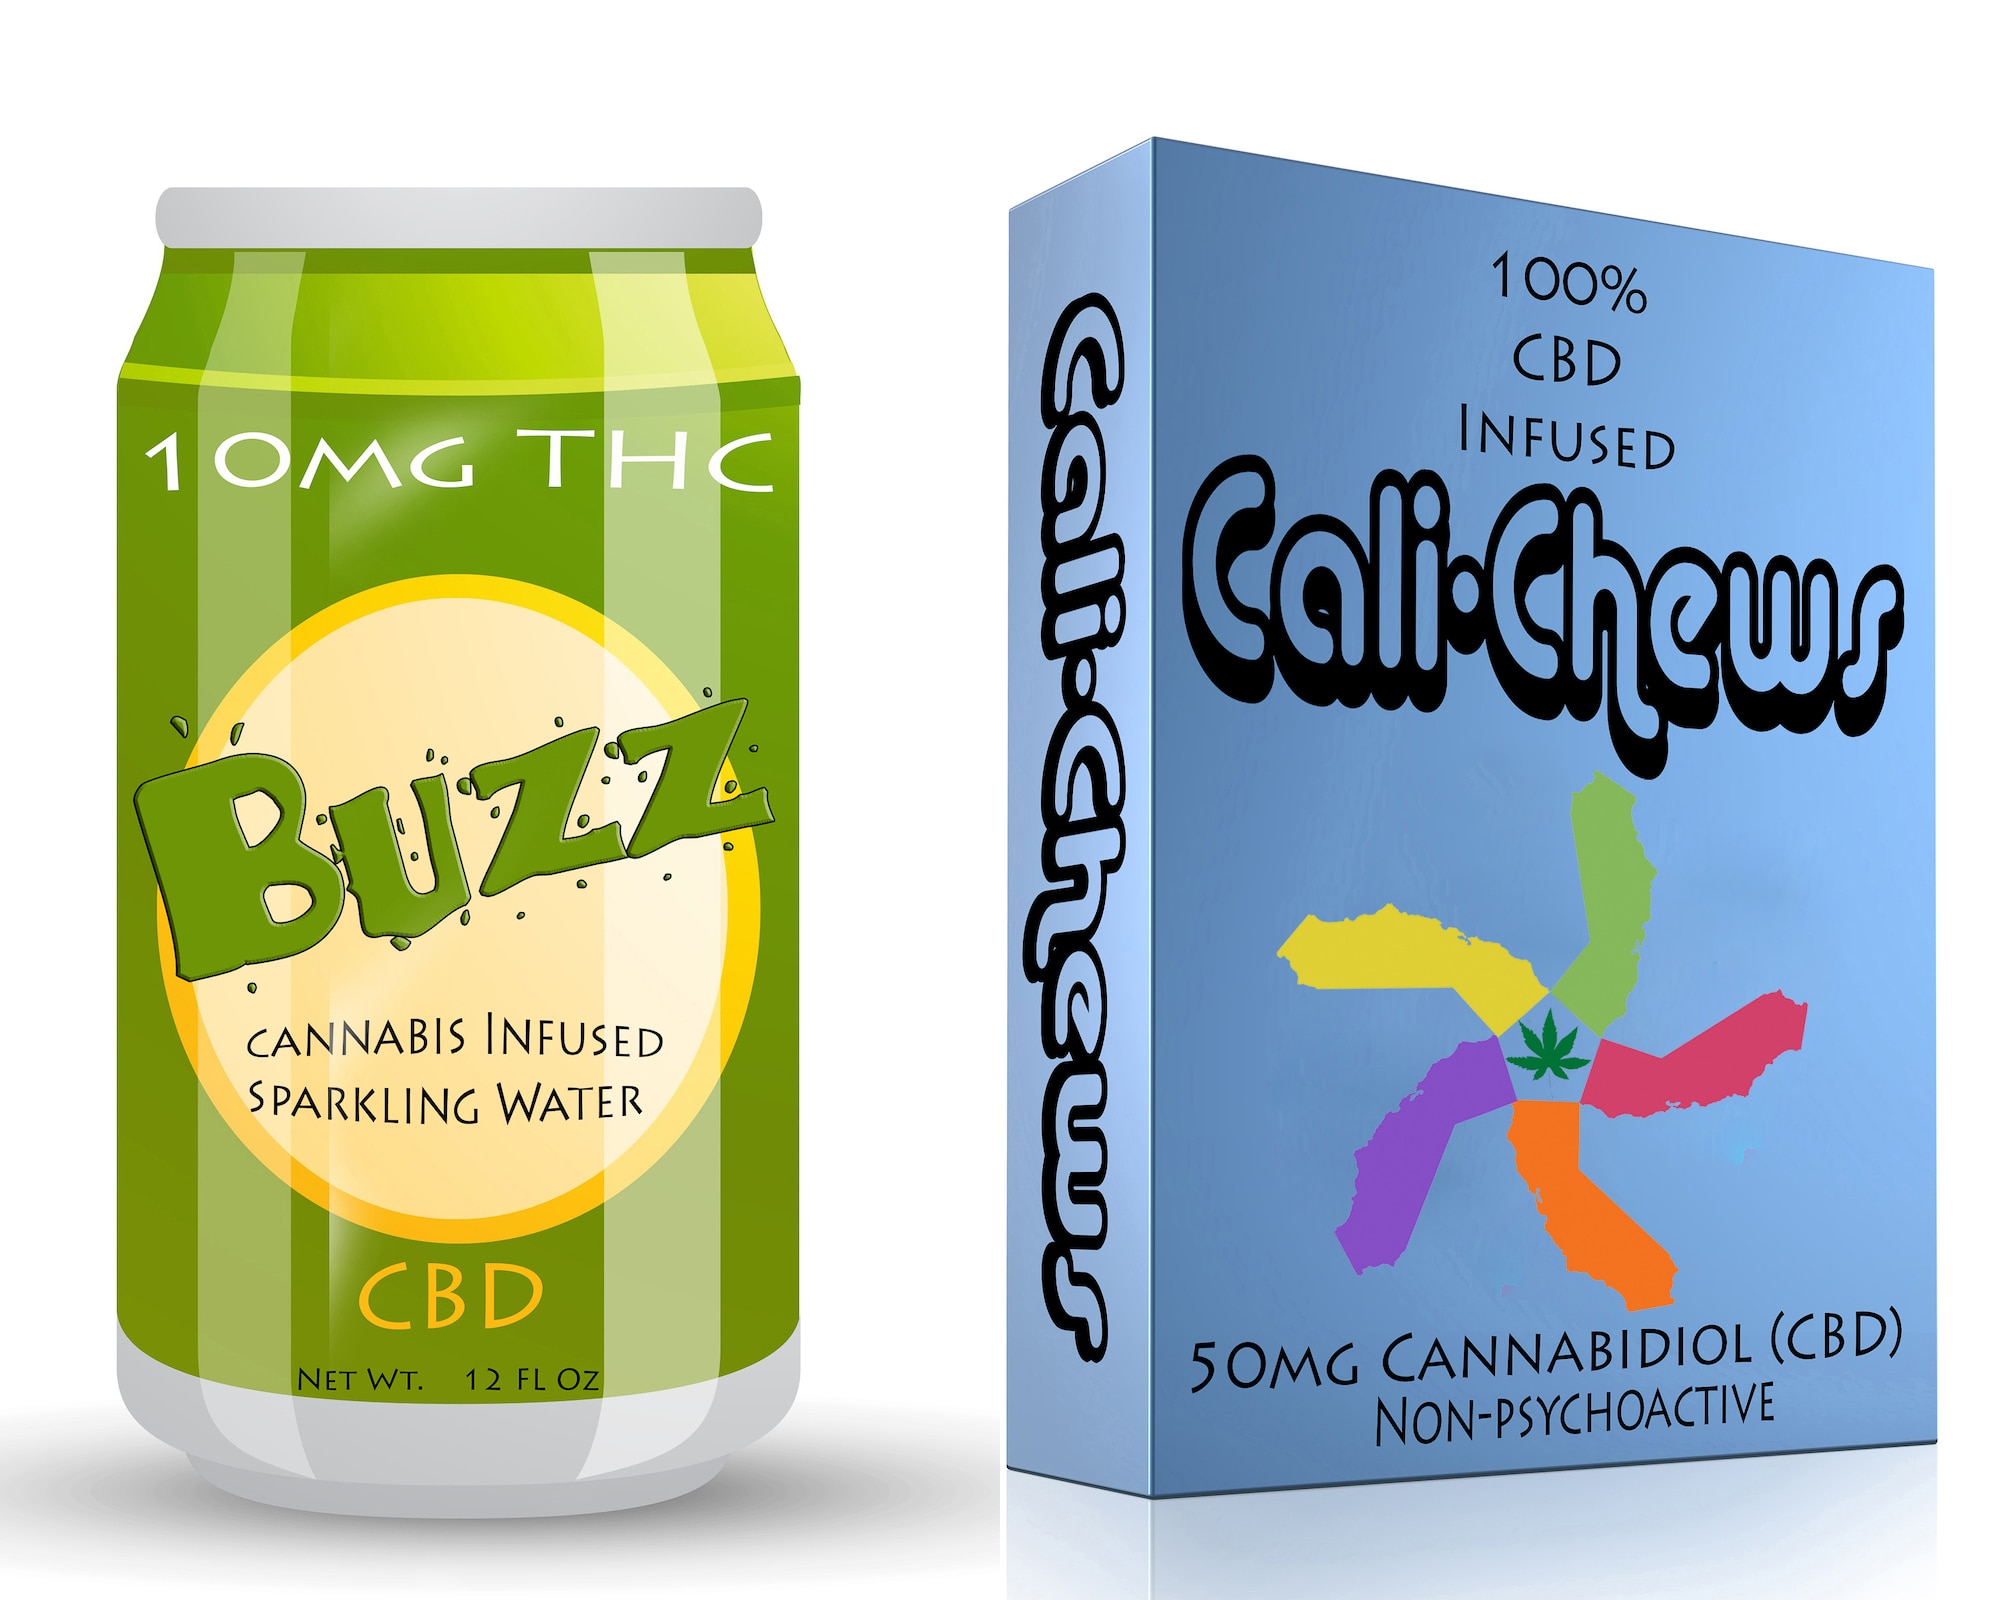 Cannabidiol (CBD) products are increasingly sold as dietary supplements, marketed as a “vape oil,” and are being added to various commercially available food and drink items, including beer and candy. Under federal law, any product that contains CBD oil remains a controlled substance, and potentially has detectable ammounts of tetrahydrocannabinol (THC) that will show up during a drug screening. the United States military still maintains a zero tolerance policy for marijuana use, regardless of form. (U.S. Air Force illustration by Mauricio Campino and Airman 1st Class Dedan Dials)